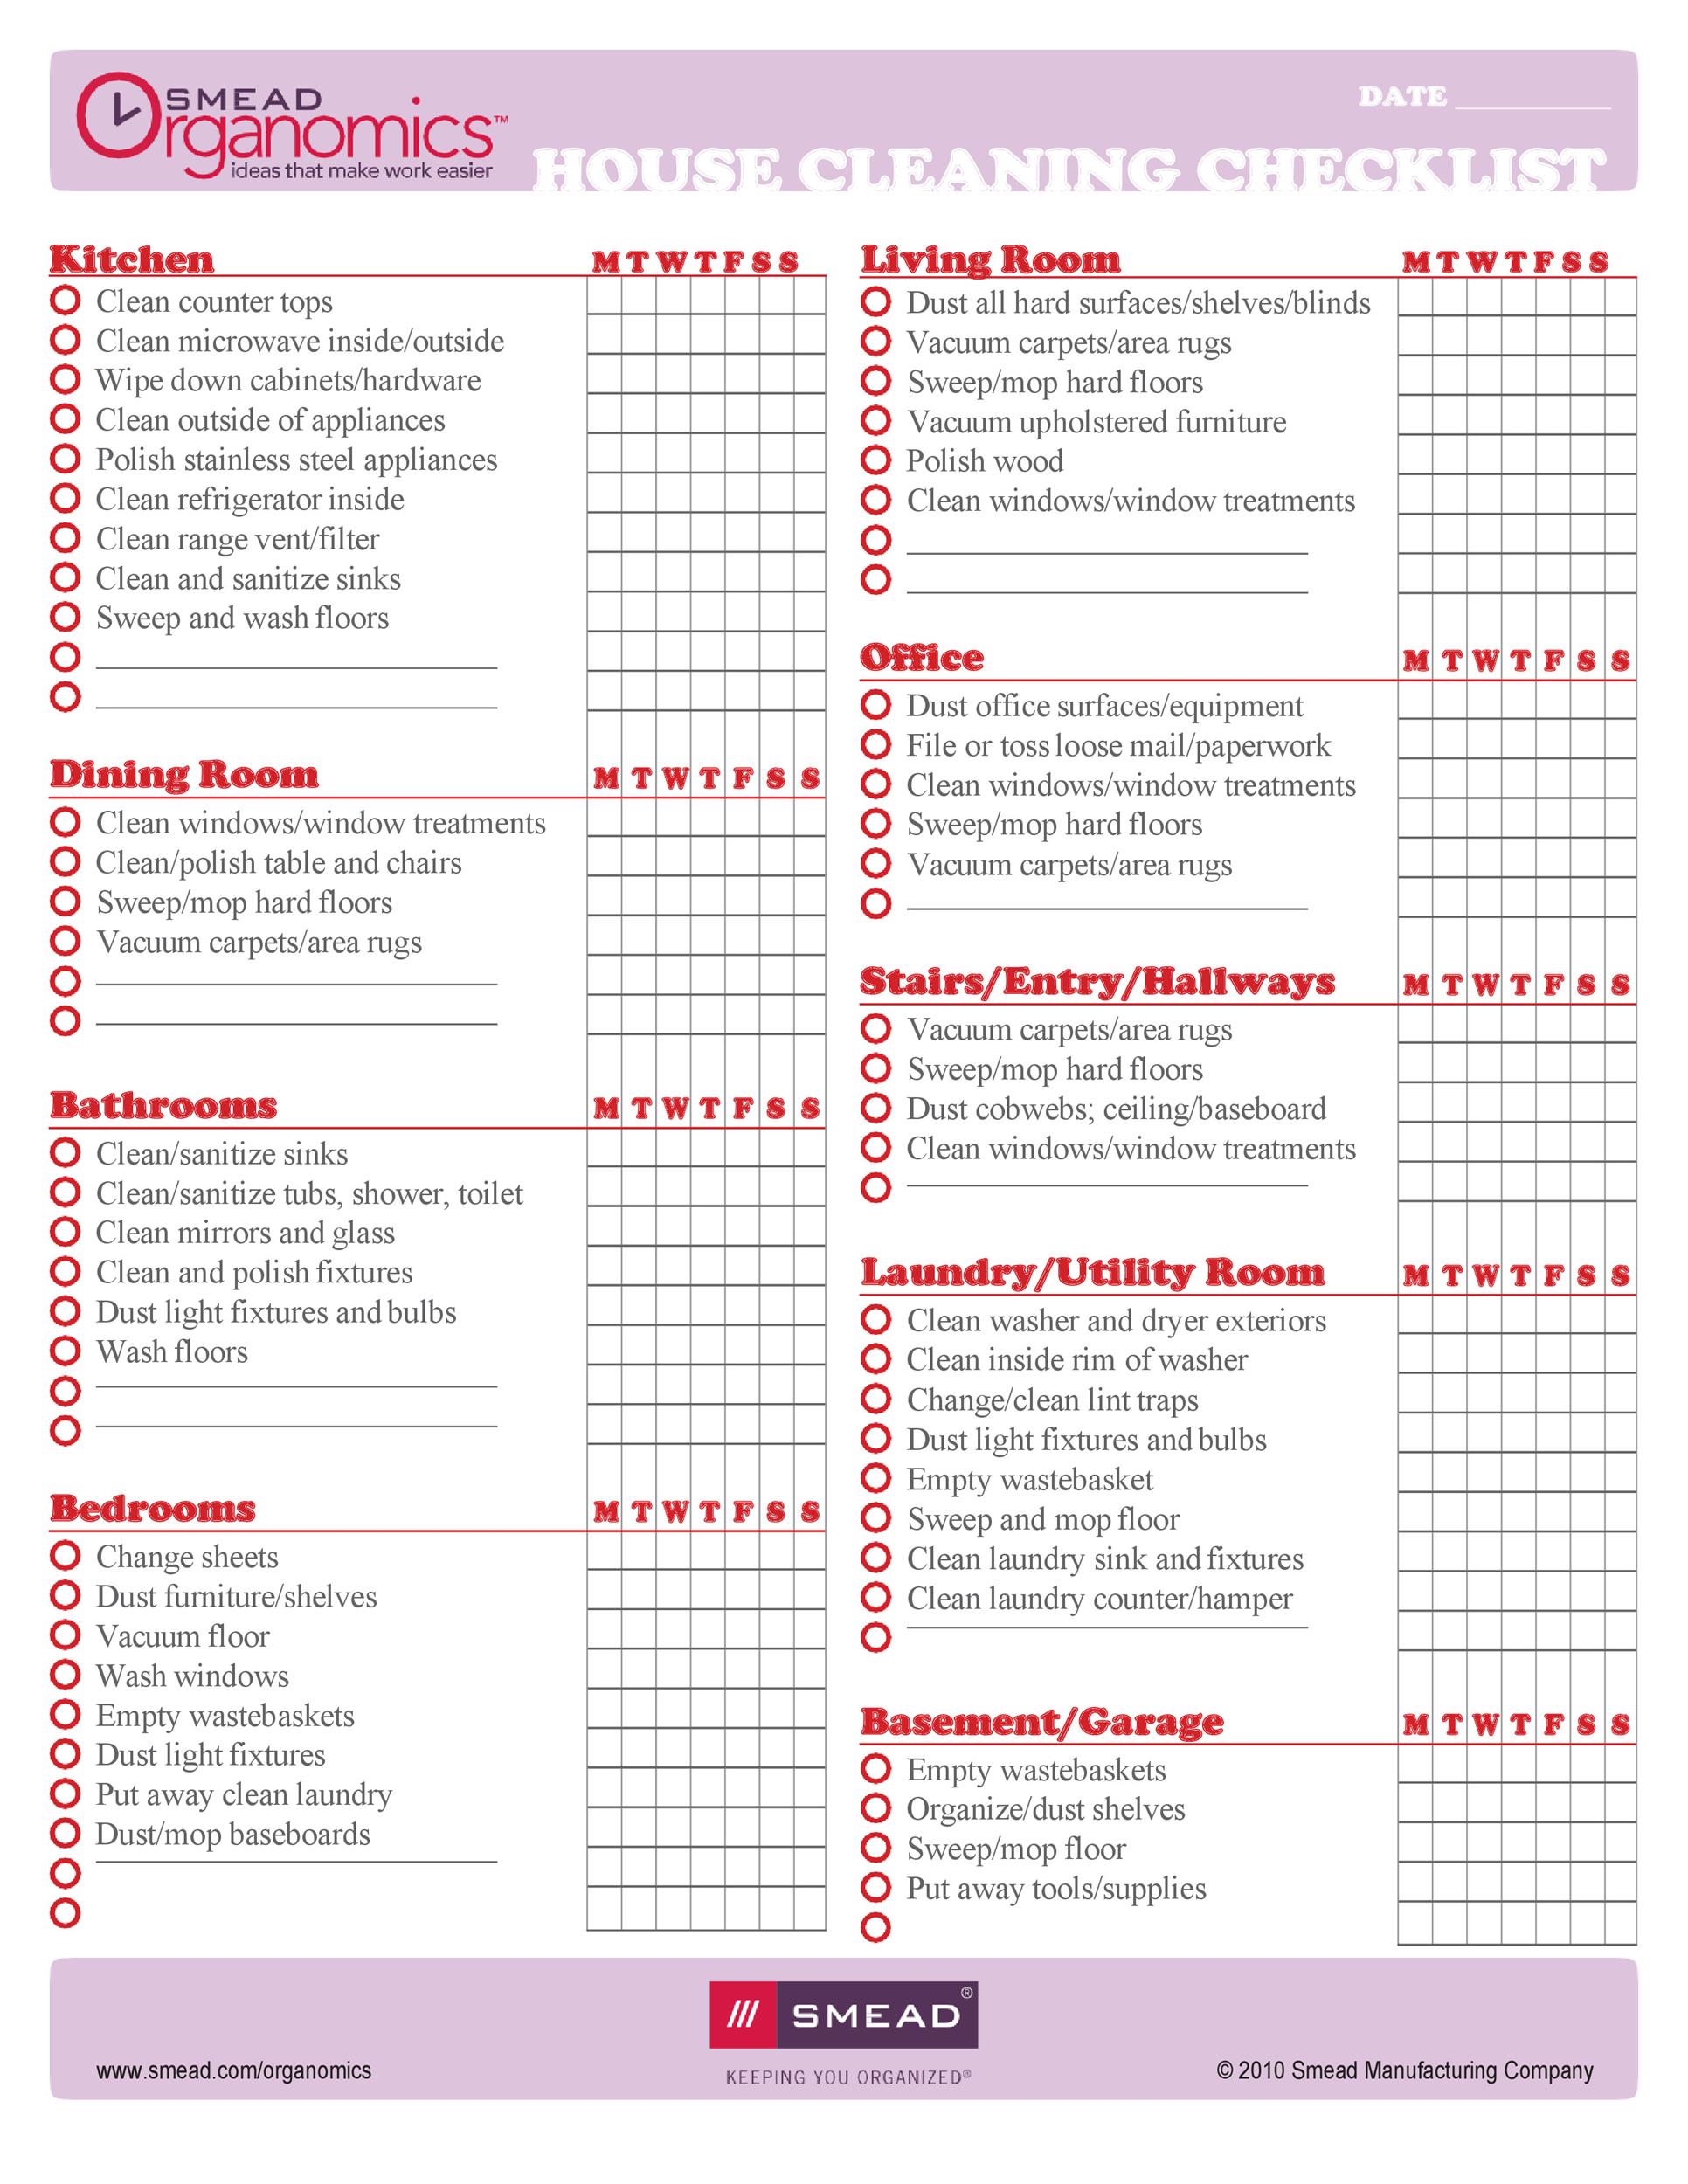 5s Manufacturing Housekeeping Checklist